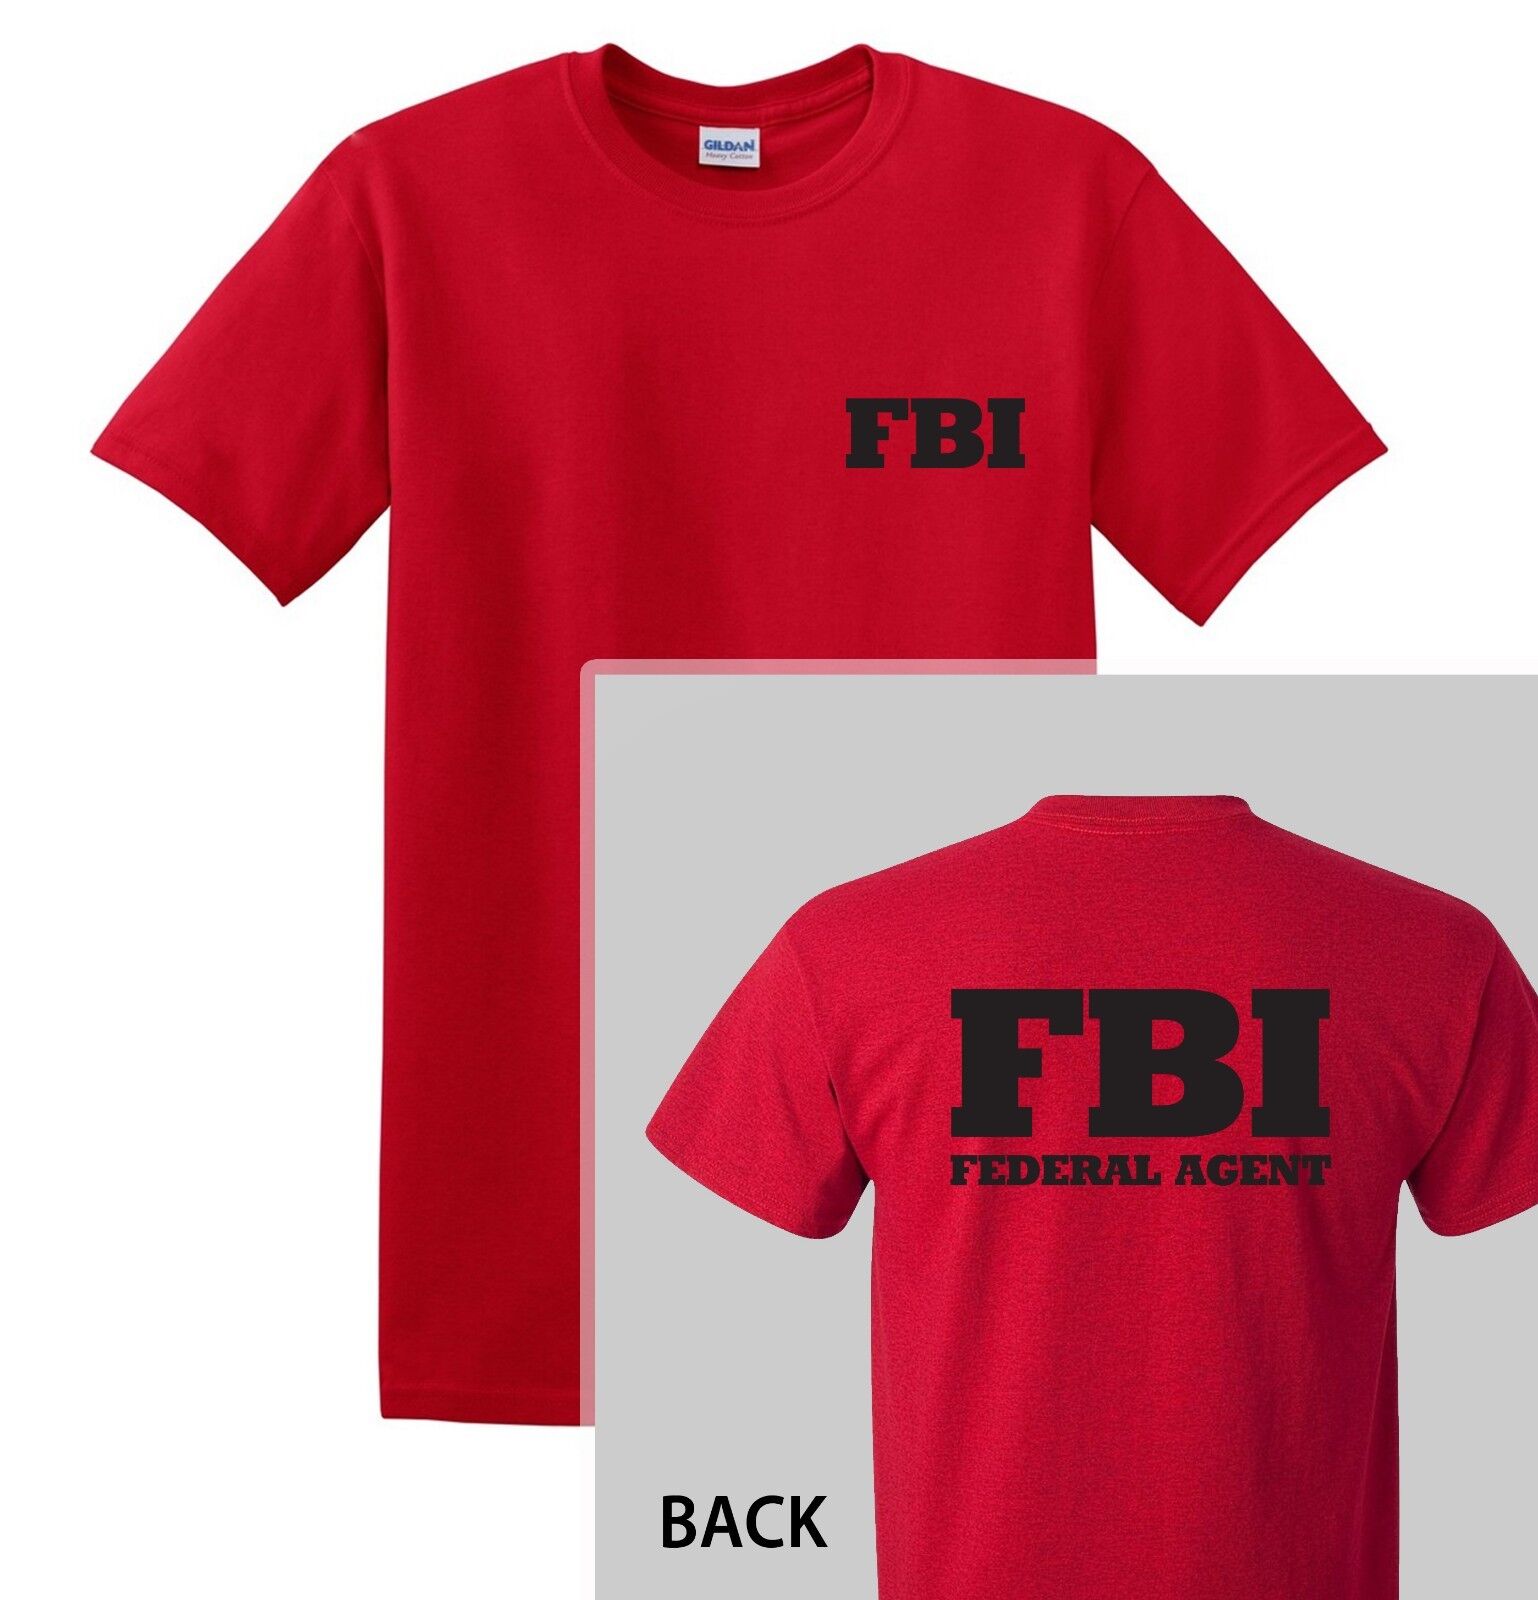 FBI T-SHIRT - youth and adult uo to 5x in 7 Colors - | eBay